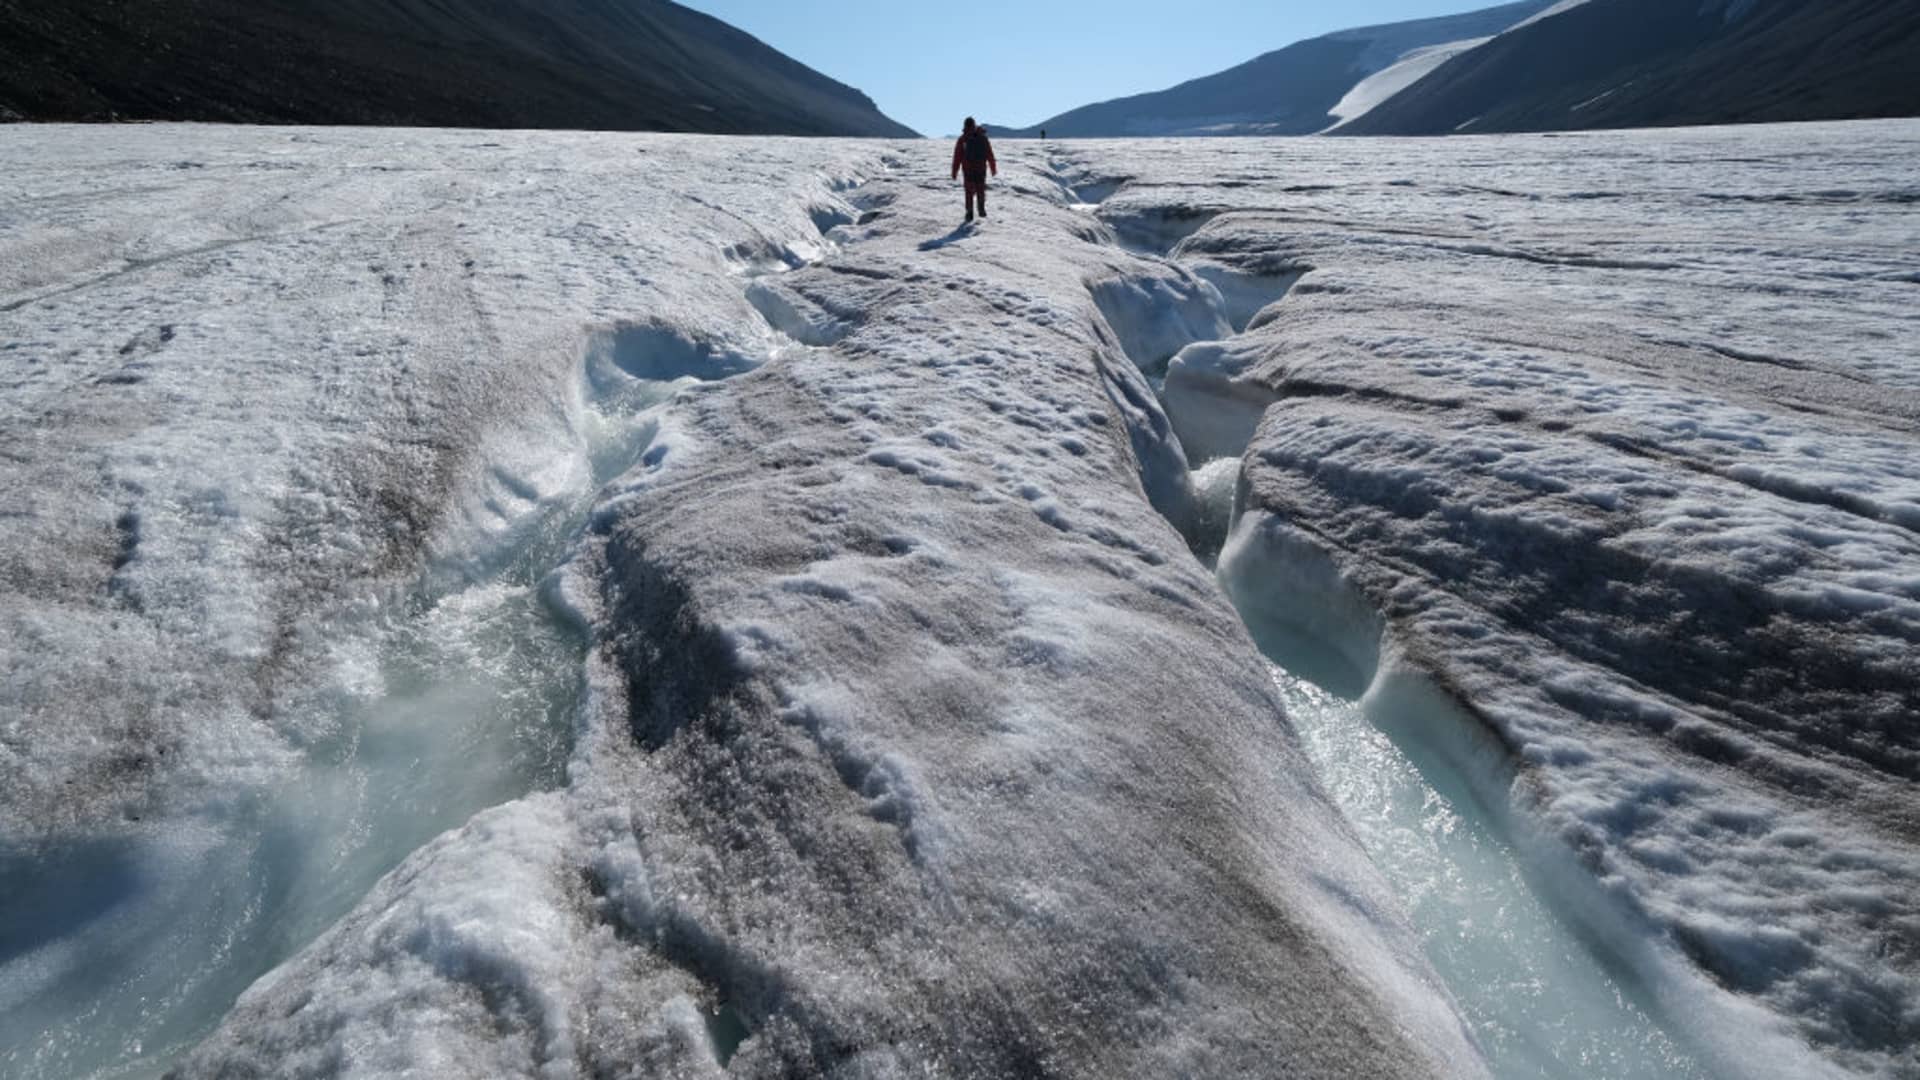 A hiker walks among winding channels carved by water on the surface of the melting Longyearbreen glacier during a summer heat wave on Svalbard archipelago on July 31, 2020 near Longyearbyen, Norway. Global warming is having a dramatic impact on Svalbard that, according to Norwegian meteorological data, includes a rise in average winter temperatures of 10 degrees Celsius over the past 30 years, creating disruptions to the entire local ecosystem.